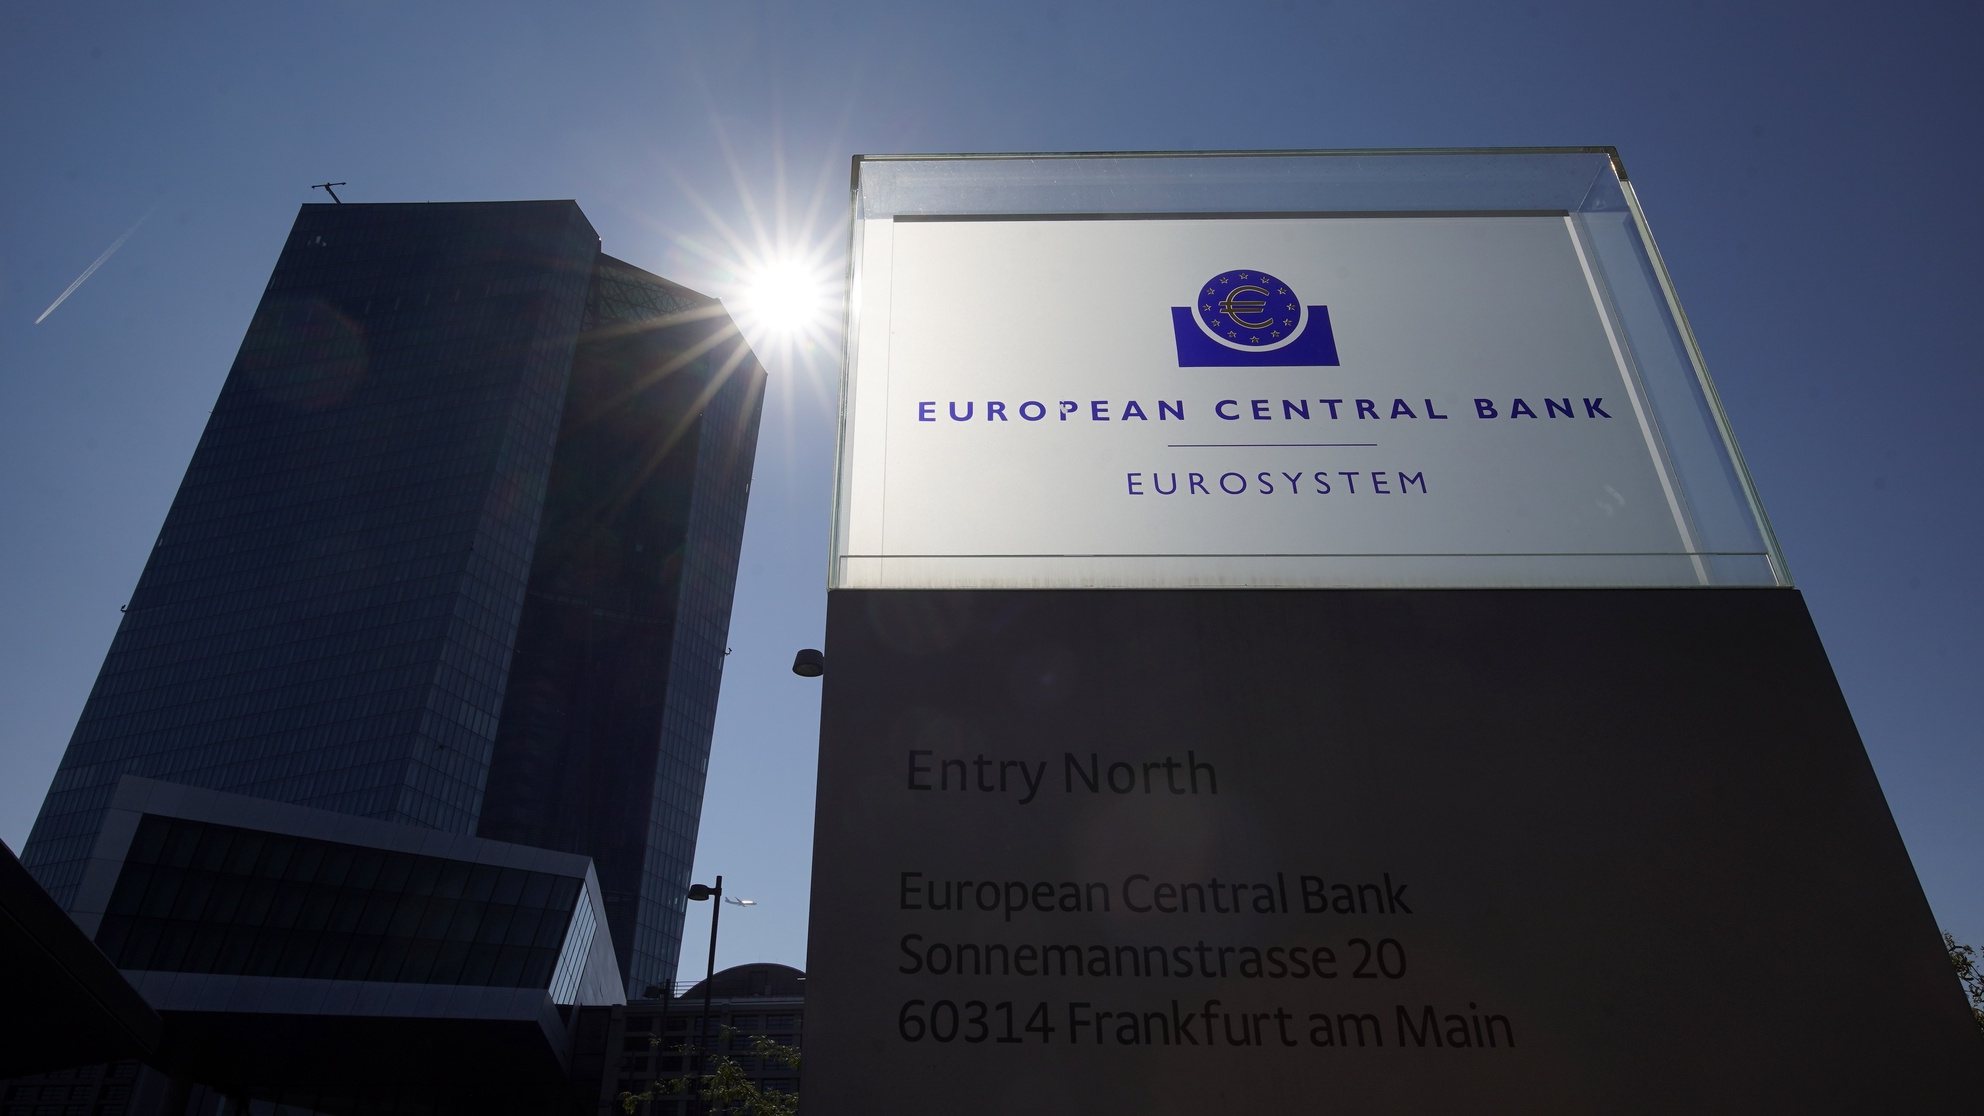 epa09658527 (FILE) - A sign leads to the entrance of the new building of the European Central Bank (ECB) in Frankfurt am Main, Germany, 09 September 202 (reissued 28 December 2021). The ECB moved to their new building in Frankfurt&#039;s Ostend district in early 2015. The new year&#039;s 01 January 2022 marks the 20th anniversary of the introduction of Europe&#039;s first ever single currency. A dozen European countries with Austria, Belgium, Finland, France, Germany, Greece, Ireland, Italy, Luxembourg, the Netherlands, Portugal and Spain initially joined in blazing the euro trail.  EPA/RONALD WITTEK *** Local Caption *** 56432902